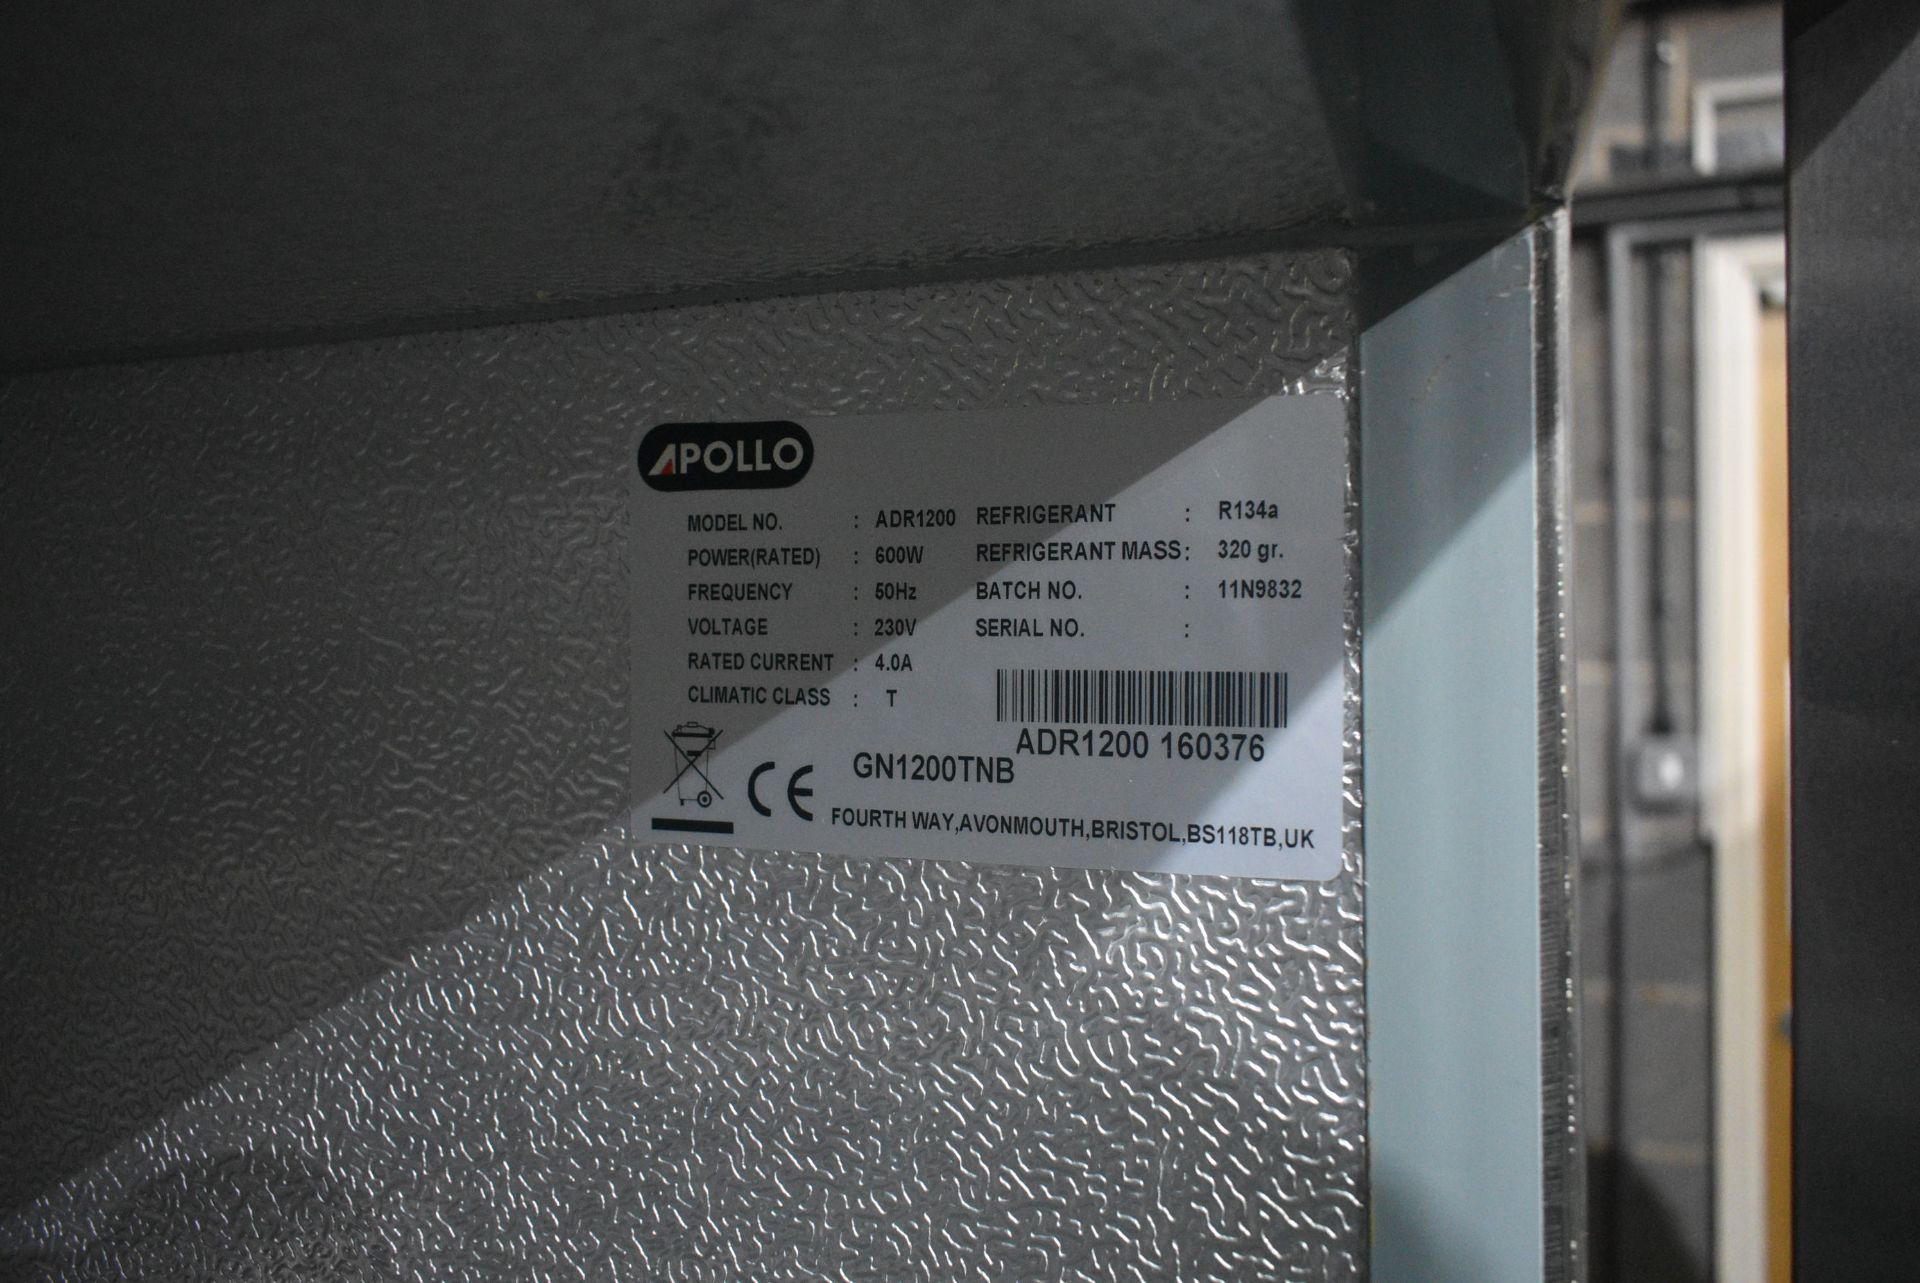 Apollo ADR1200 DOUBLE DOOR REFRIGERATOR, internal dimensions approx. 1.2m x 650mm x 1.4m high ( - Image 4 of 5